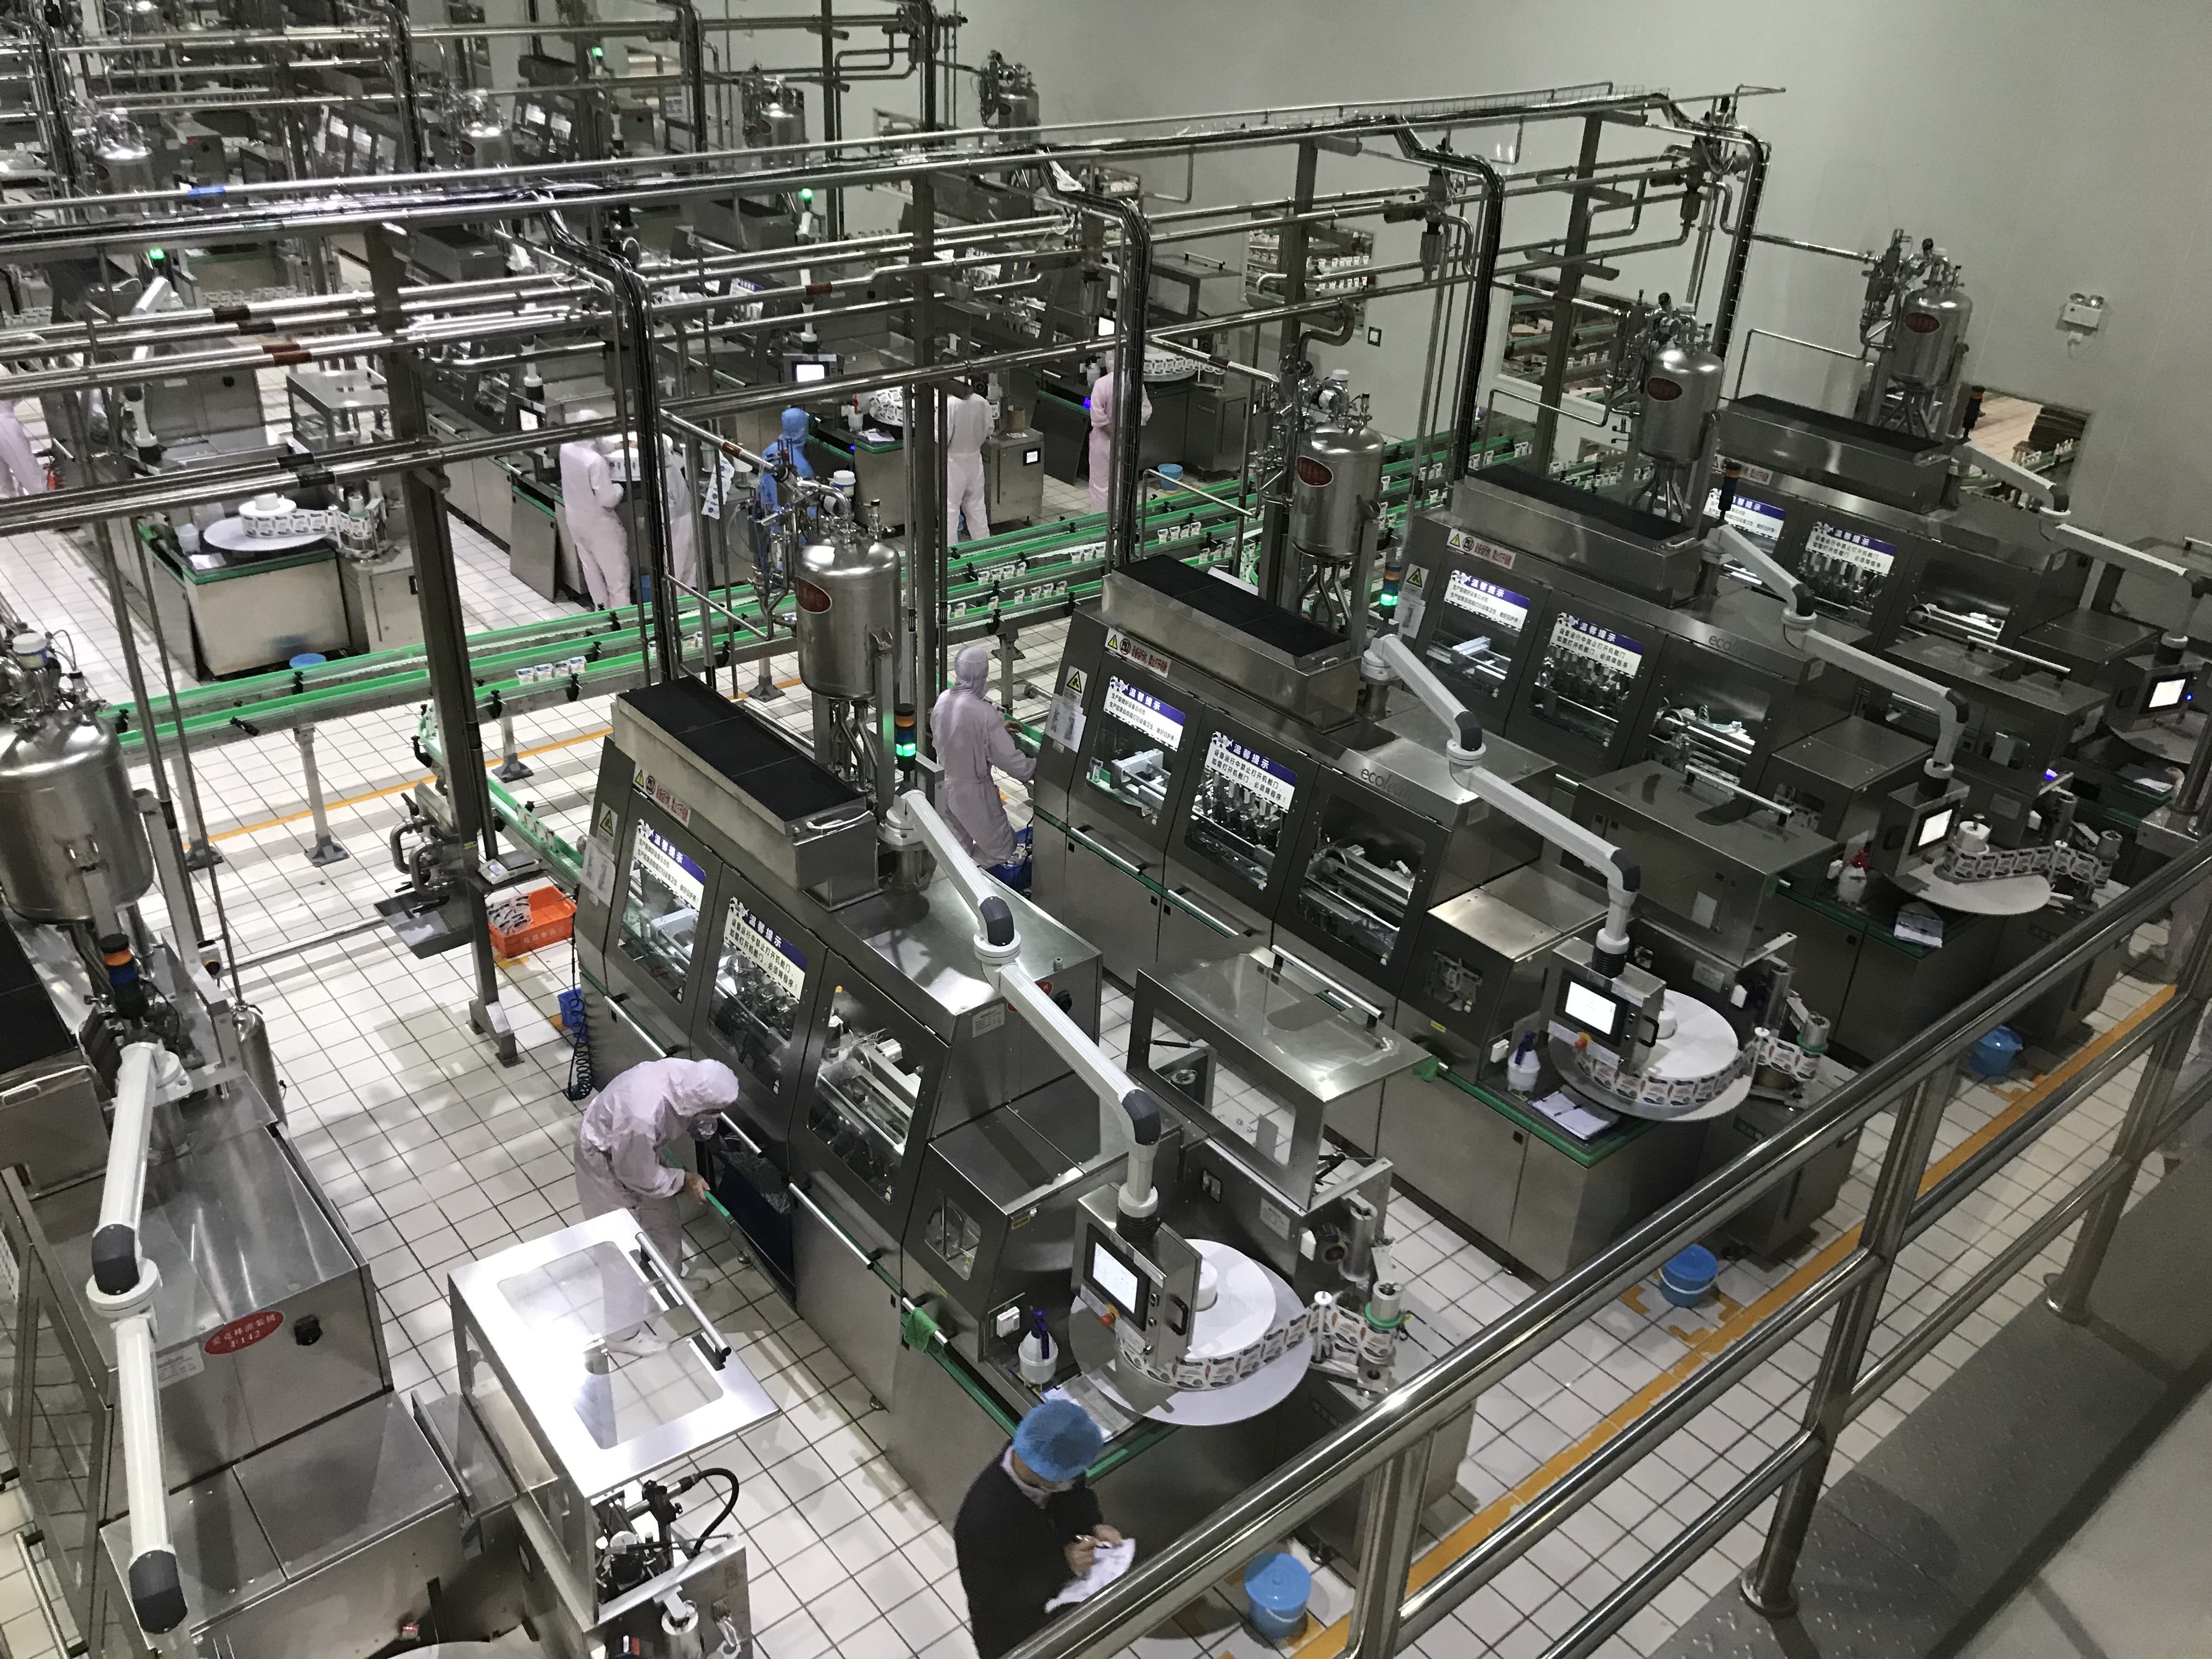 A factory of dairy giant Yili in Hohhot, Inner Mongolia, equipped using the latest technologies. Photo: Kees de Koning